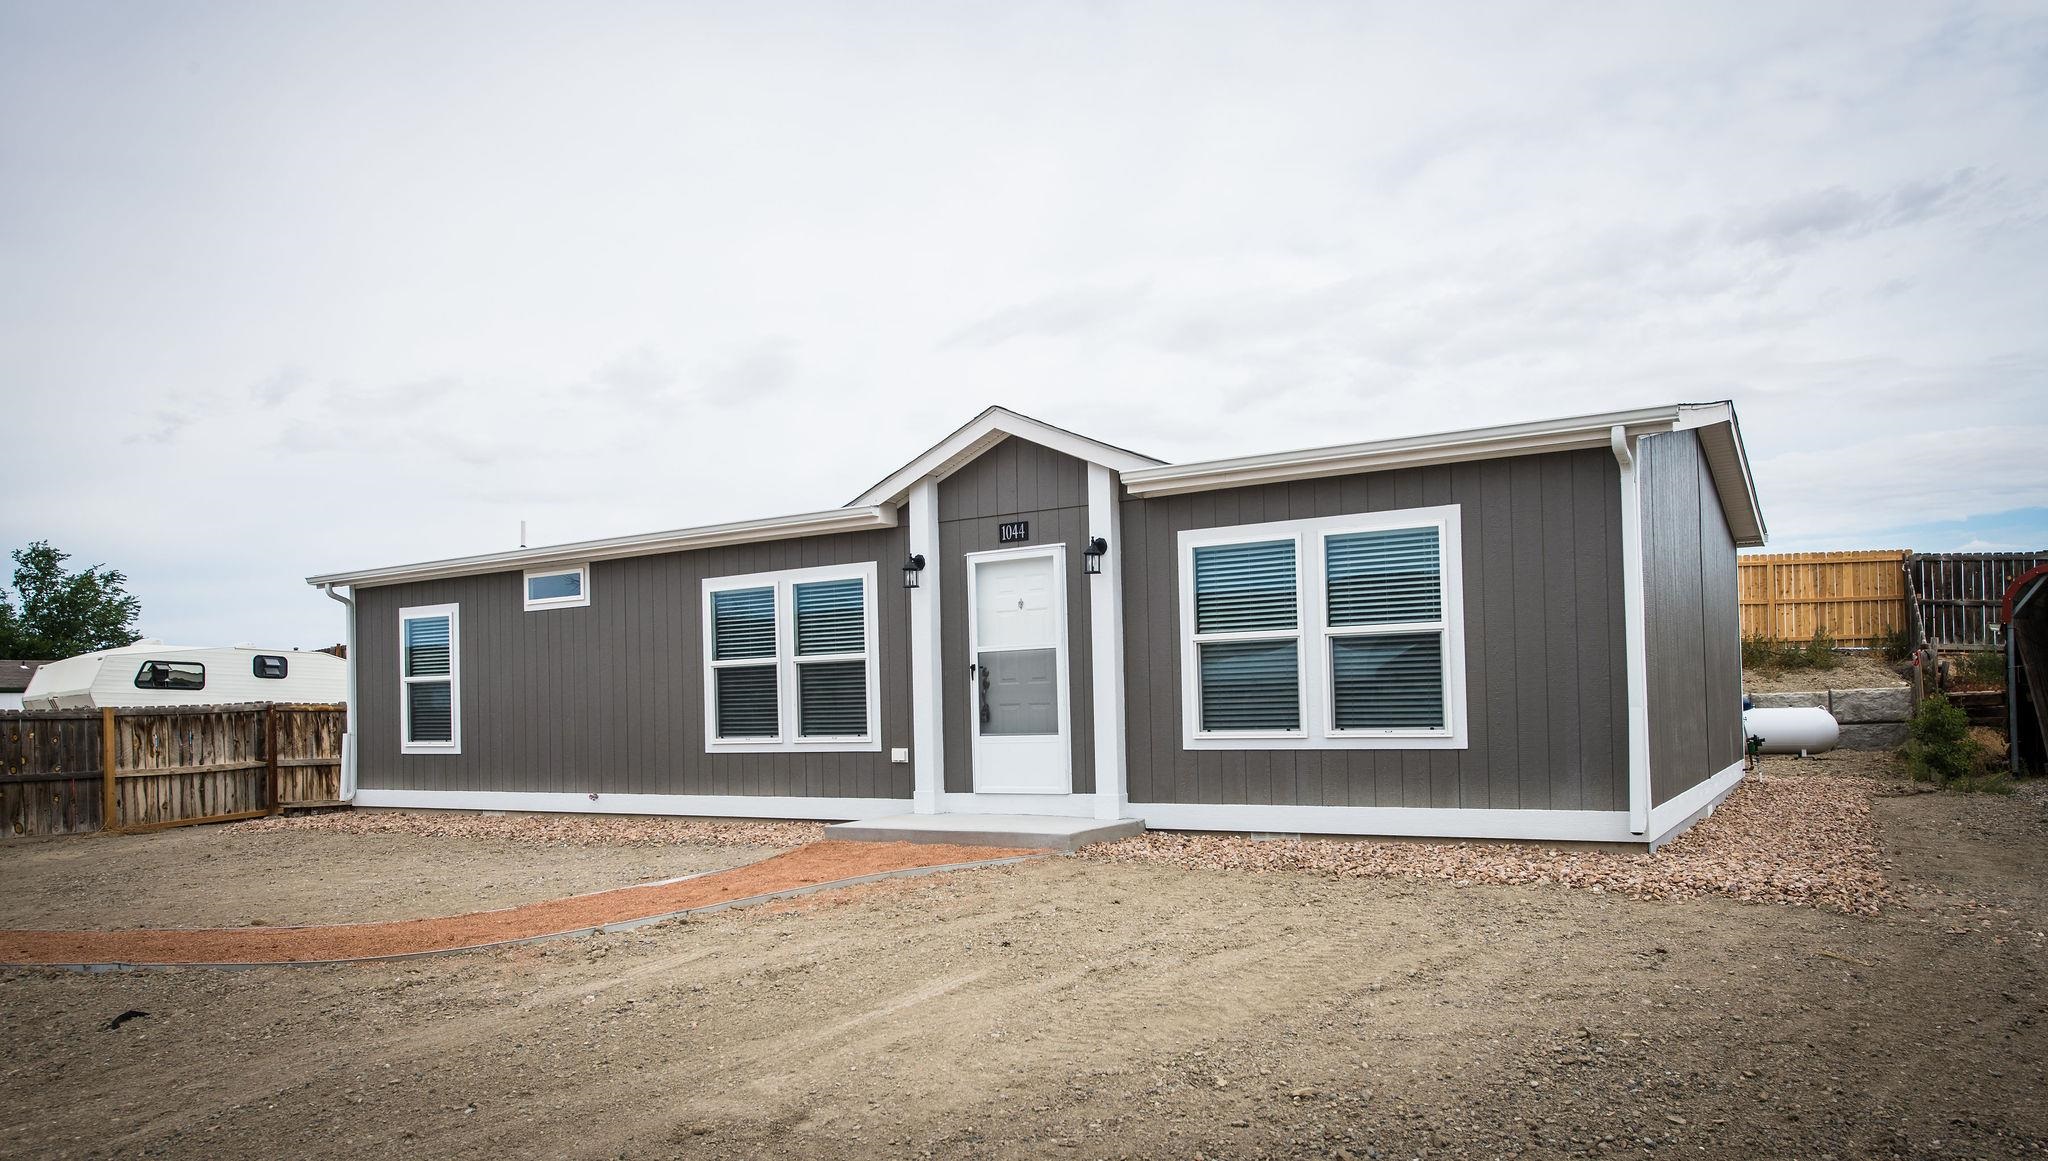 Brand New 3 bedroom, 2 bath ranch style home with 1264 sq ft. on .15 of an acre. Plenty of RV parking and big backyard. **SELLER OFFERING $7,500 towards buyers closing costs or RATE BUY DOWN!!**